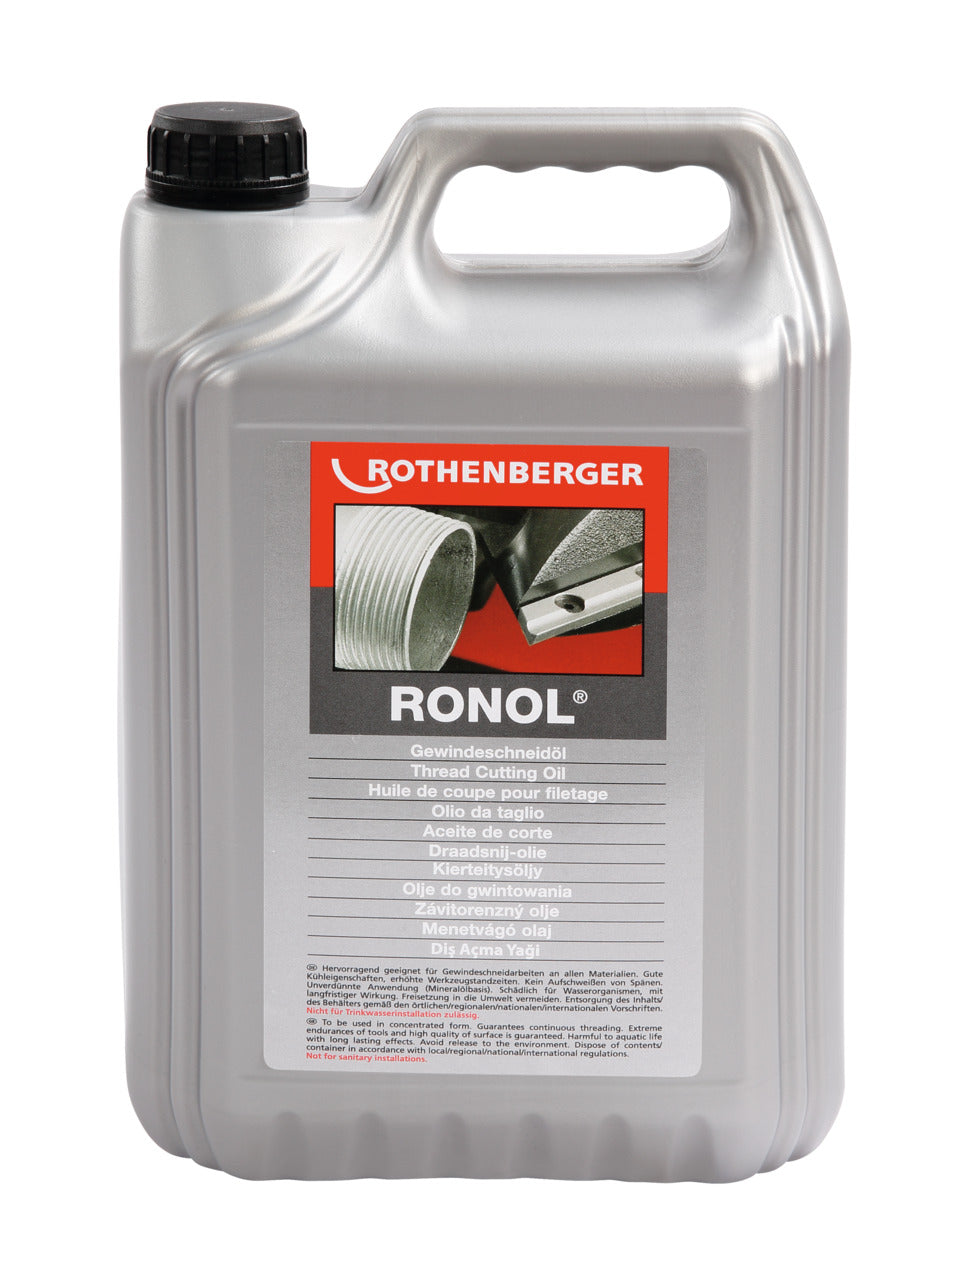 RONOL, olio minerale 5 litri ROTHENBERGER